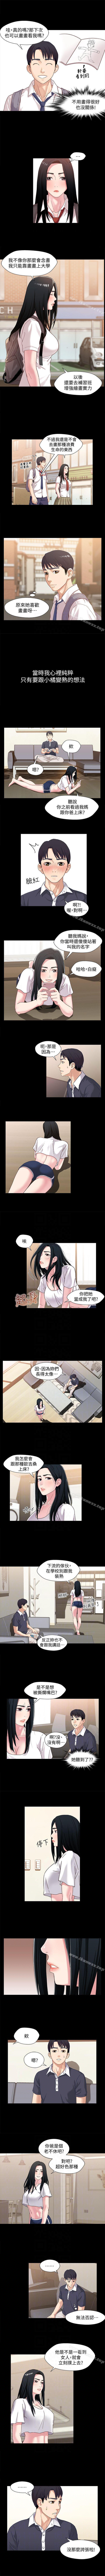 Joven 兄妹關係 1-40 Punished - Page 9